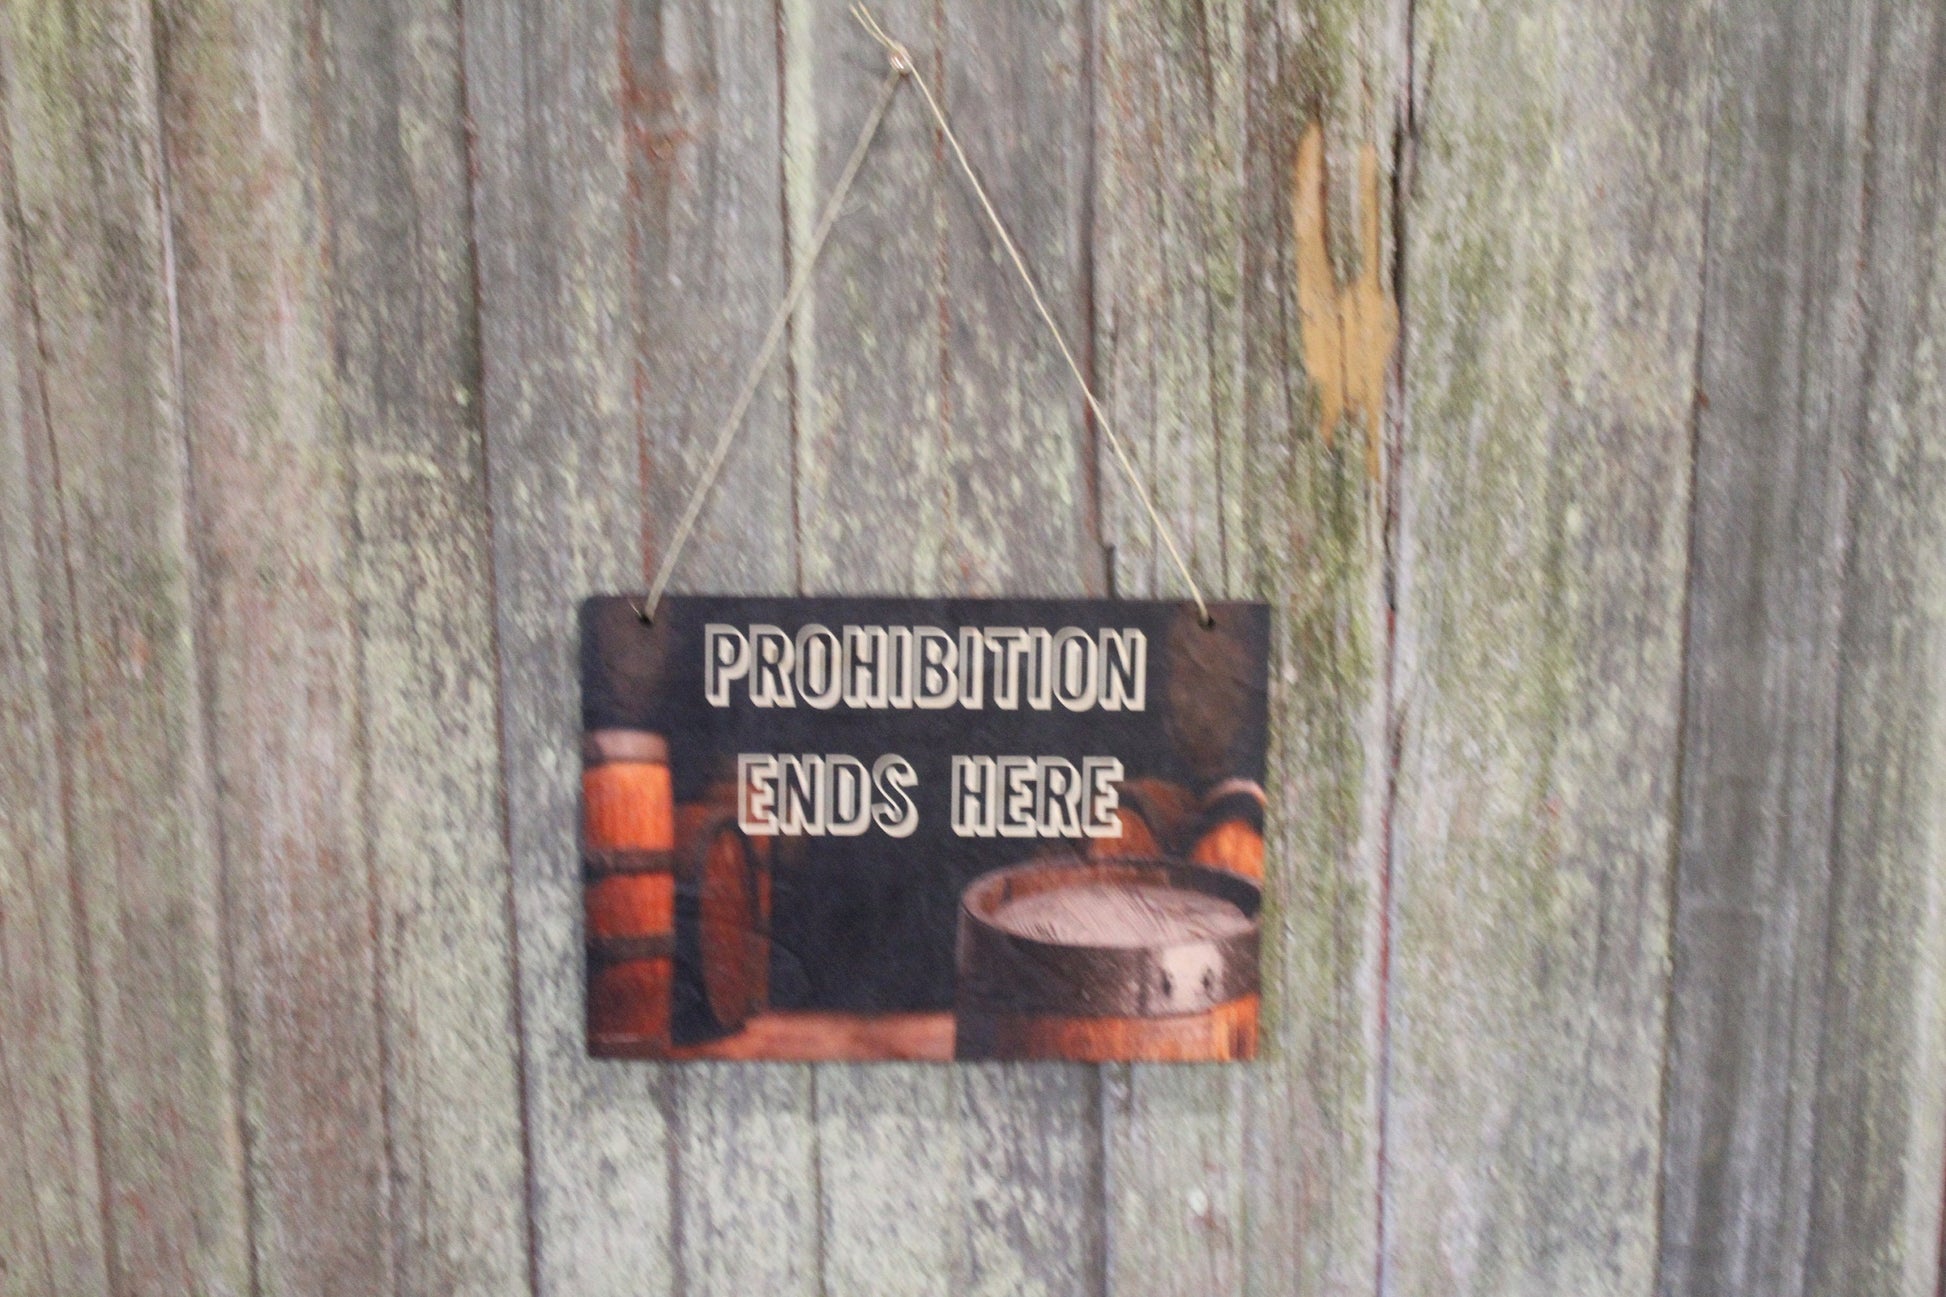 Bar Sign Prohibition Ends Here Liquor Drinking Man Cave Wine Barrel Humor Rustic Wooden Wall Decor Wood Print